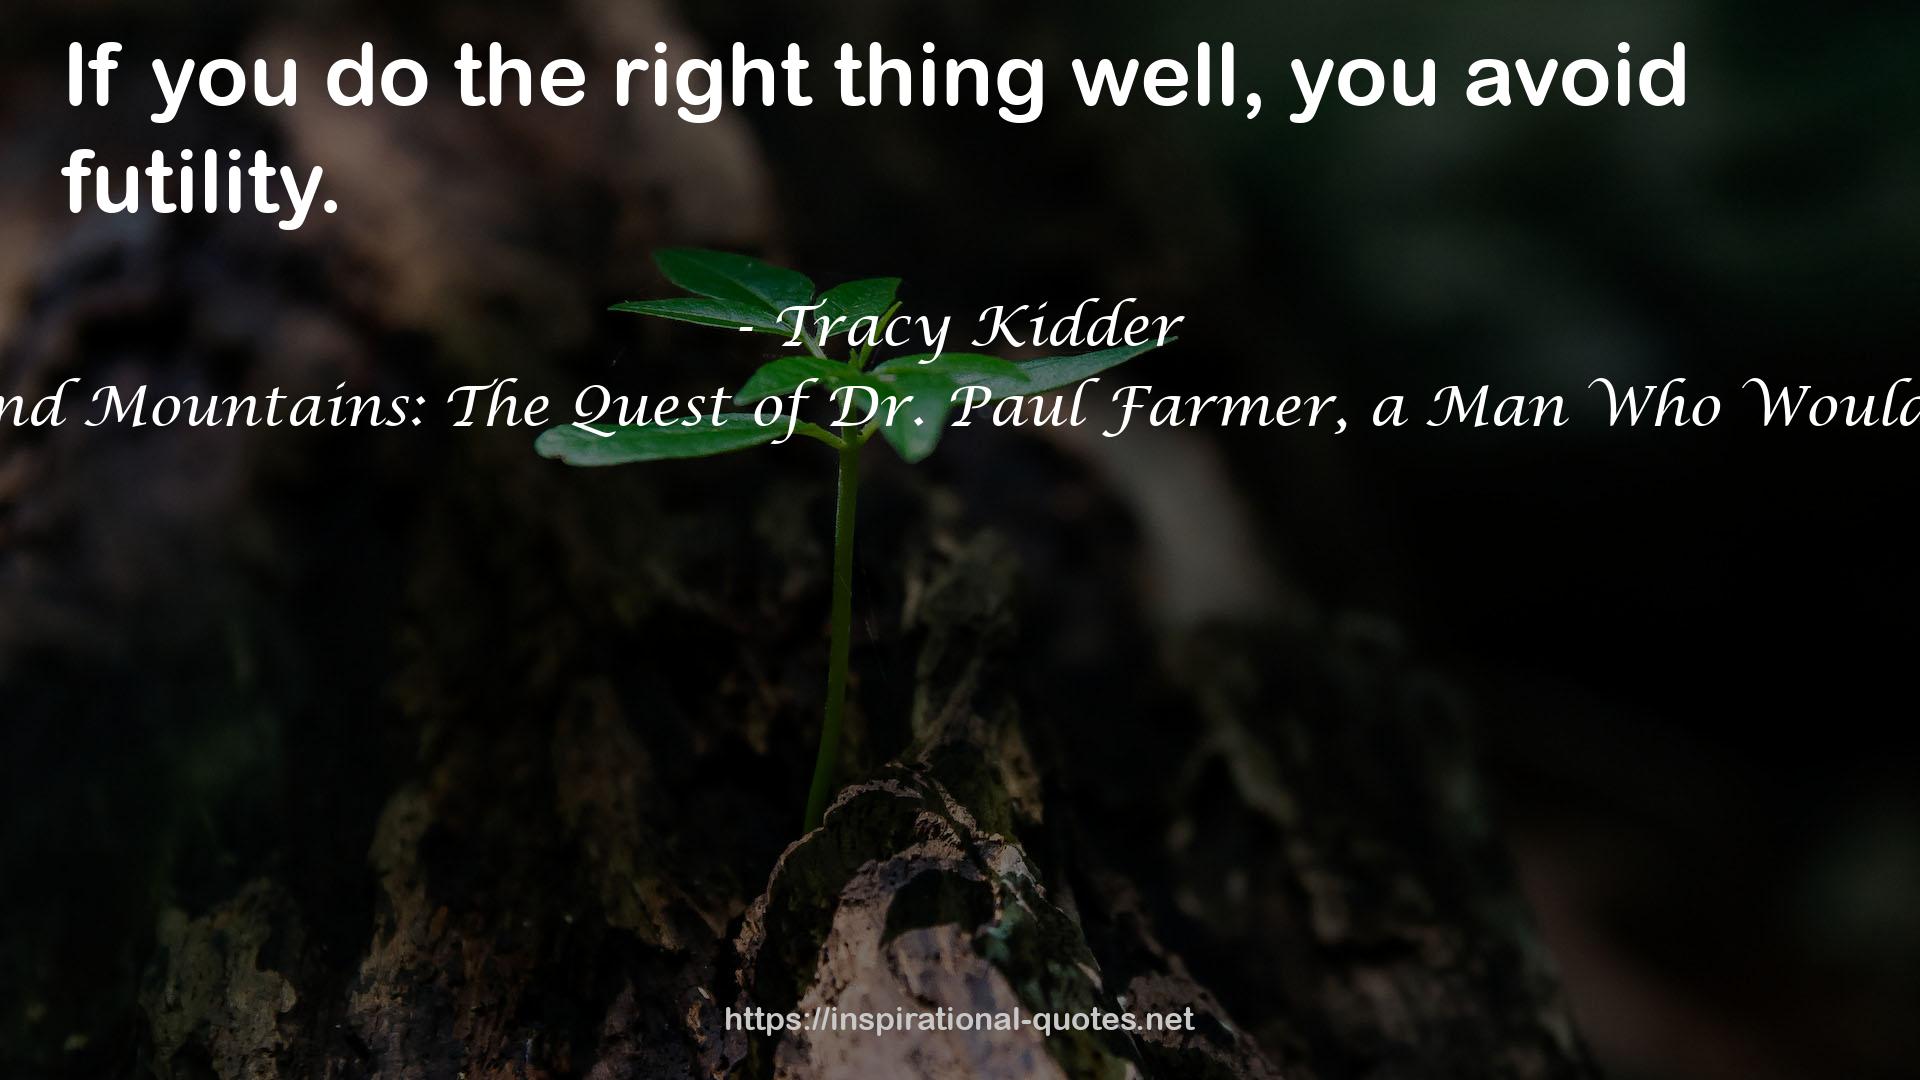 Mountains Beyond Mountains: The Quest of Dr. Paul Farmer, a Man Who Would Cure the World QUOTES